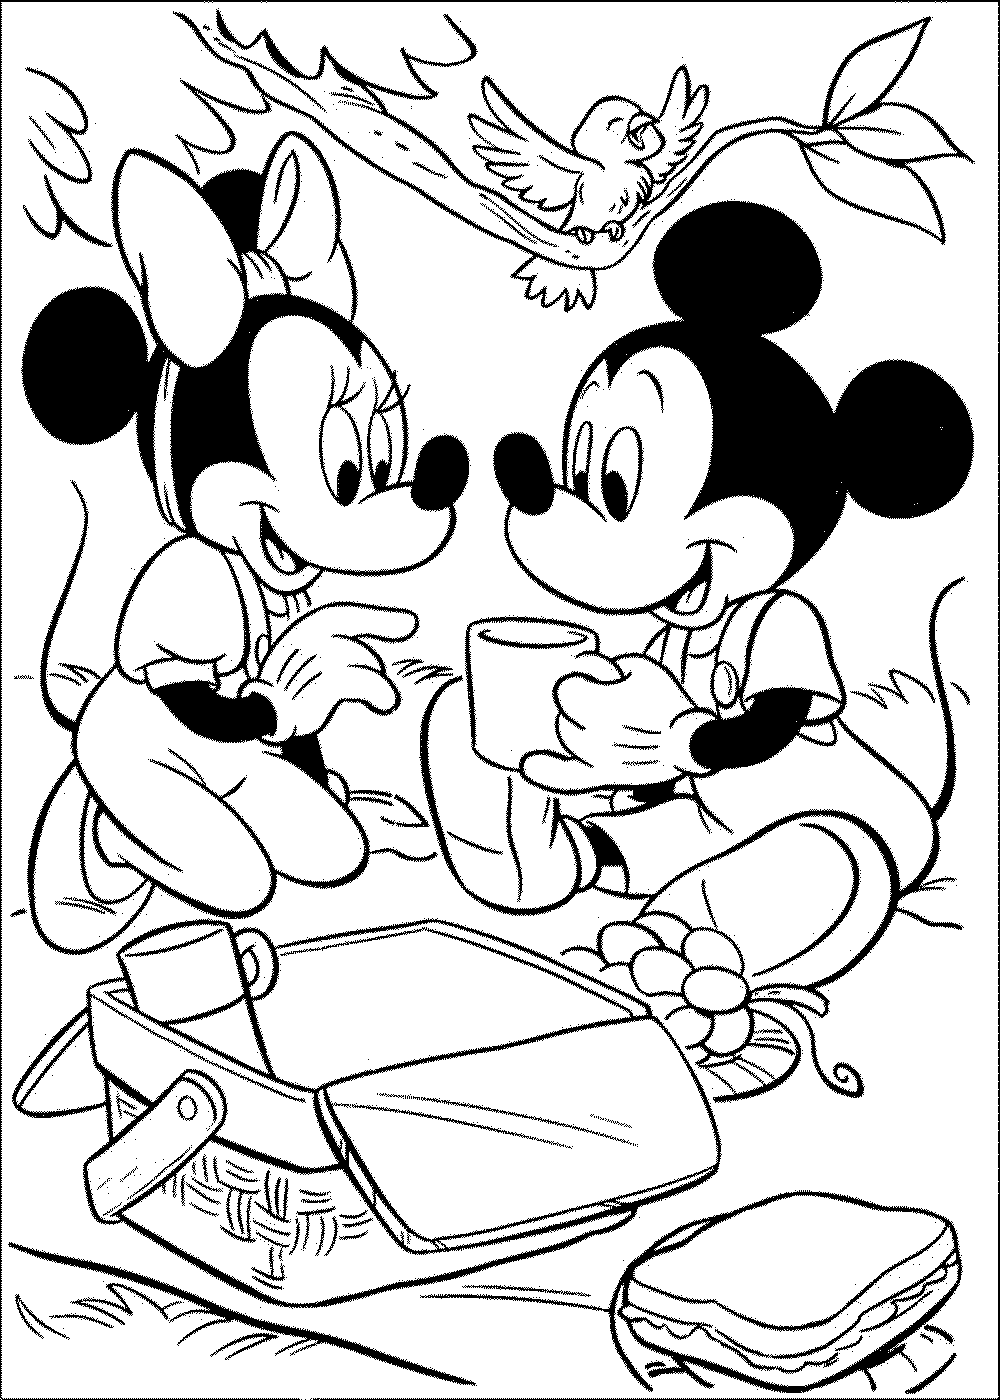 minnieandmickeymousecoloringpages   bestappsforkids